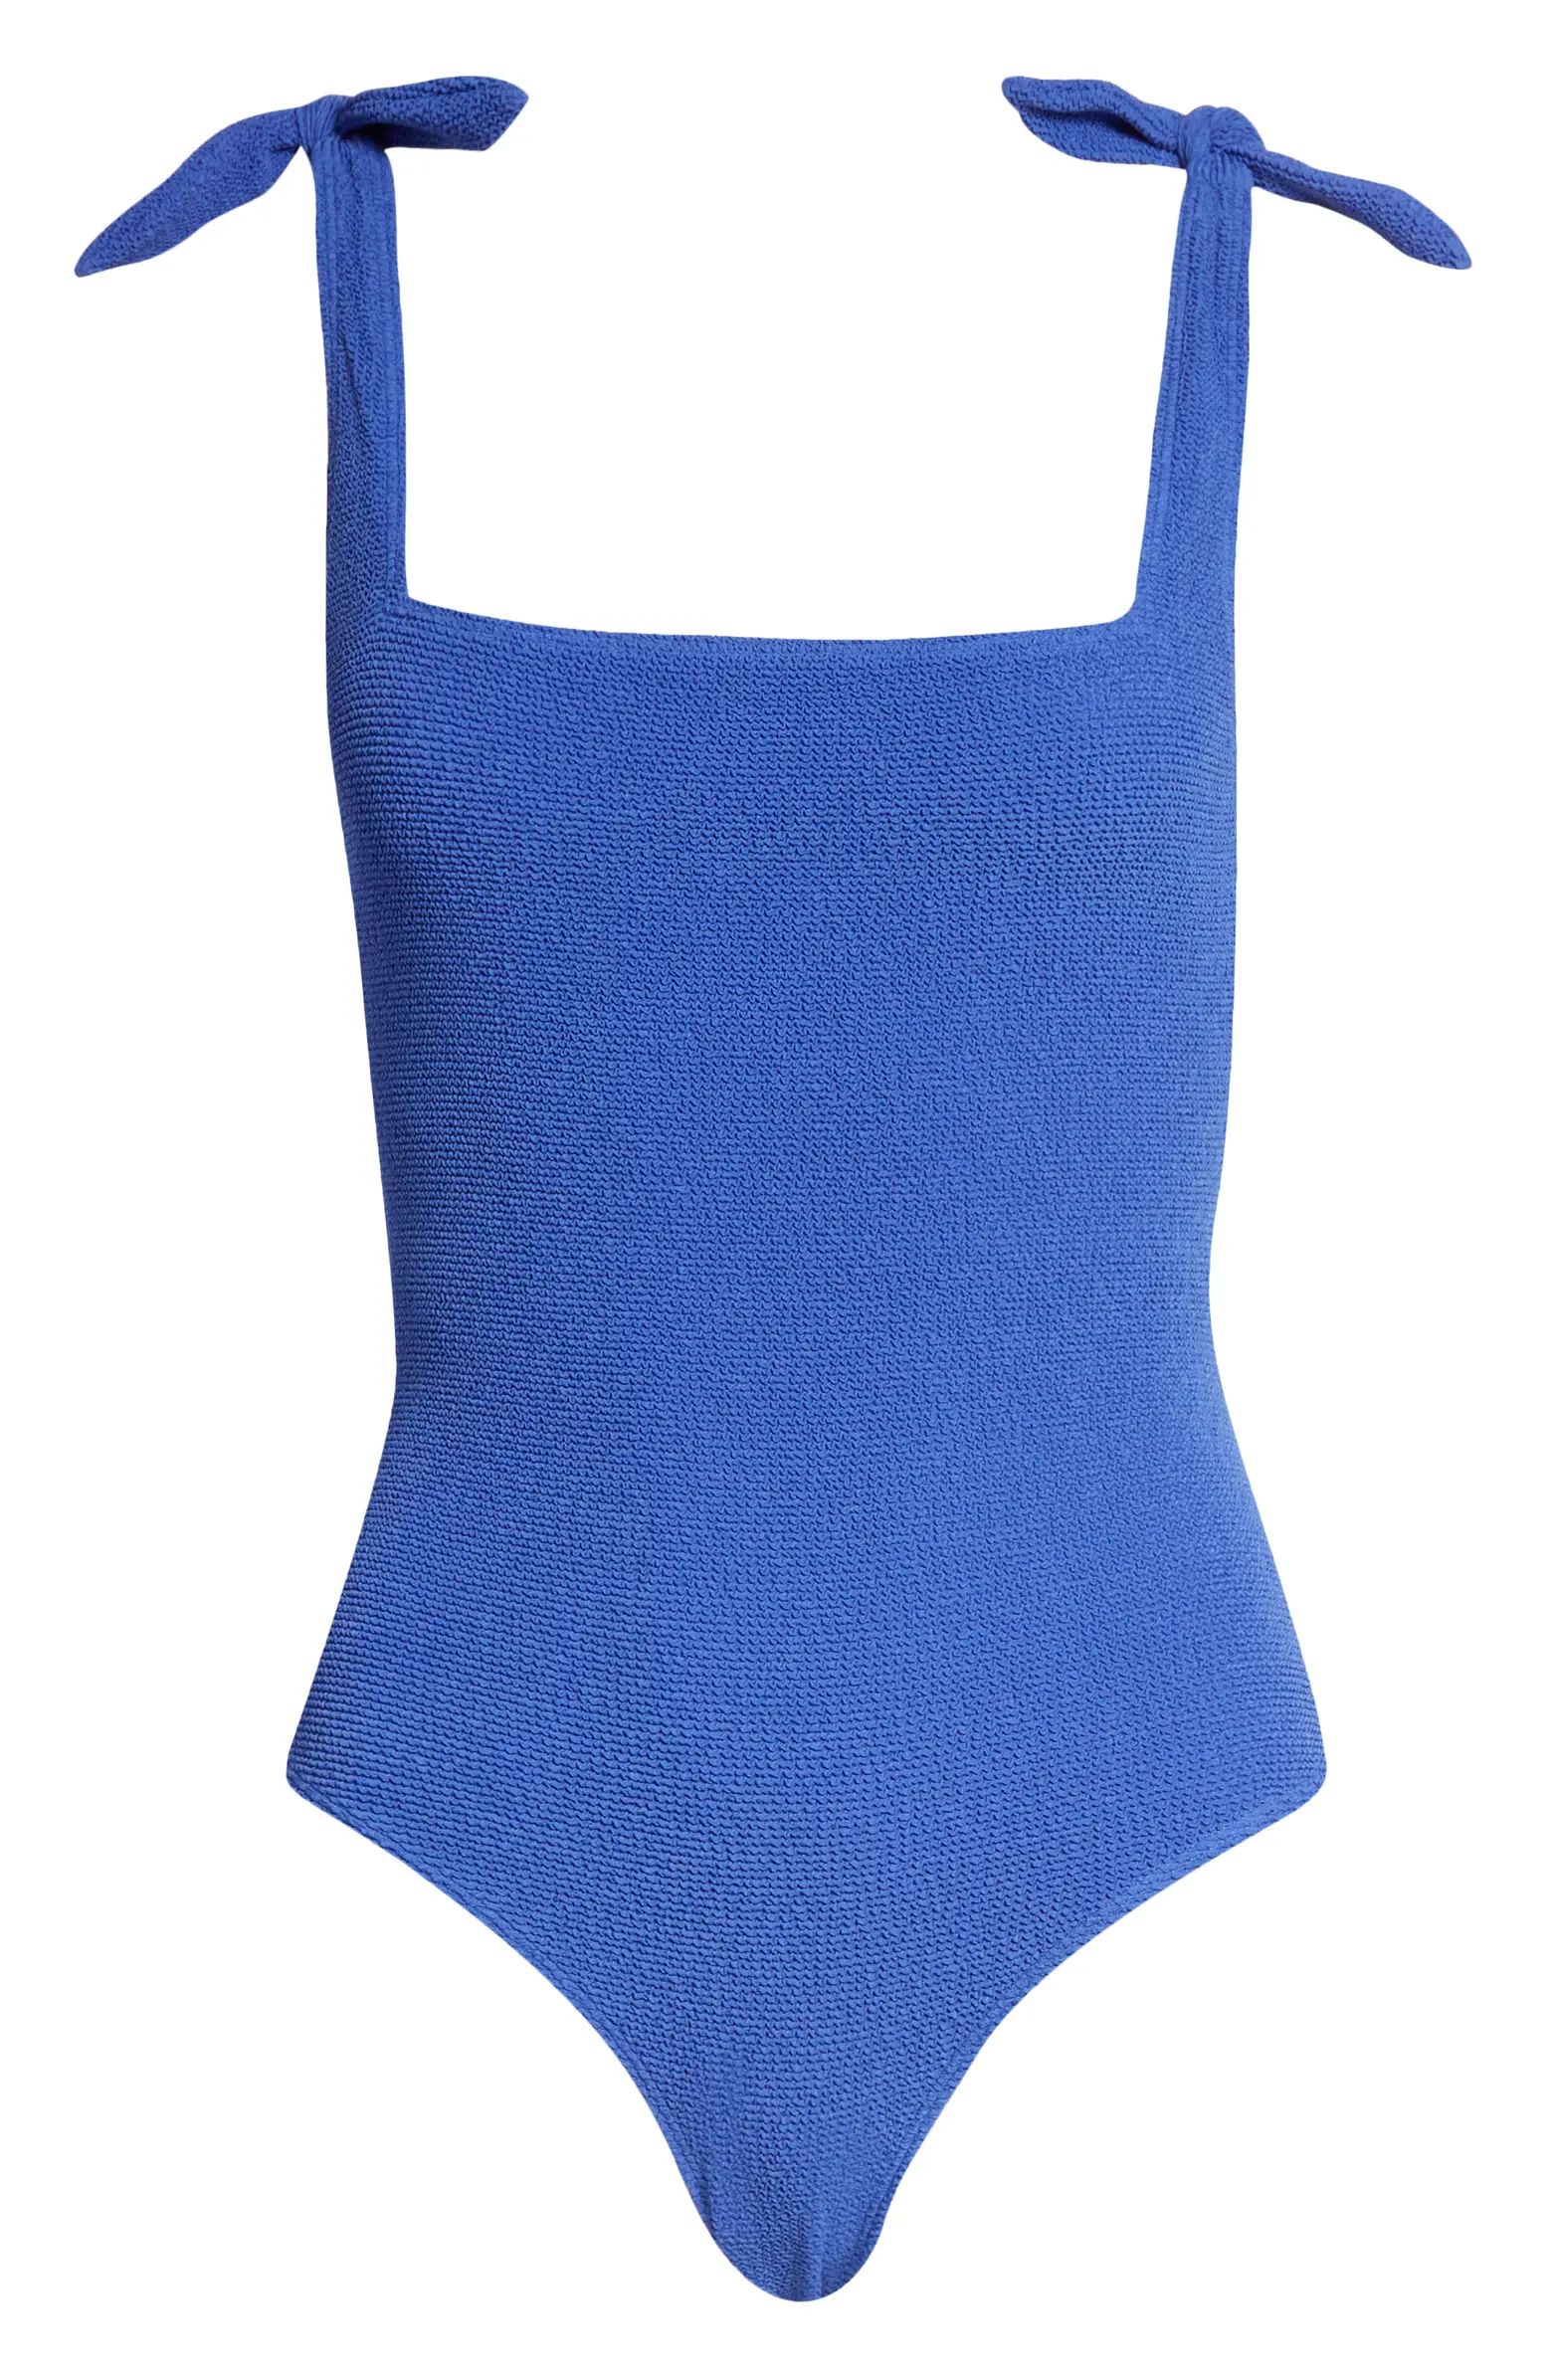 & Other Stories Diana One-Piece Swimsuit | Nordstrom | Nordstrom